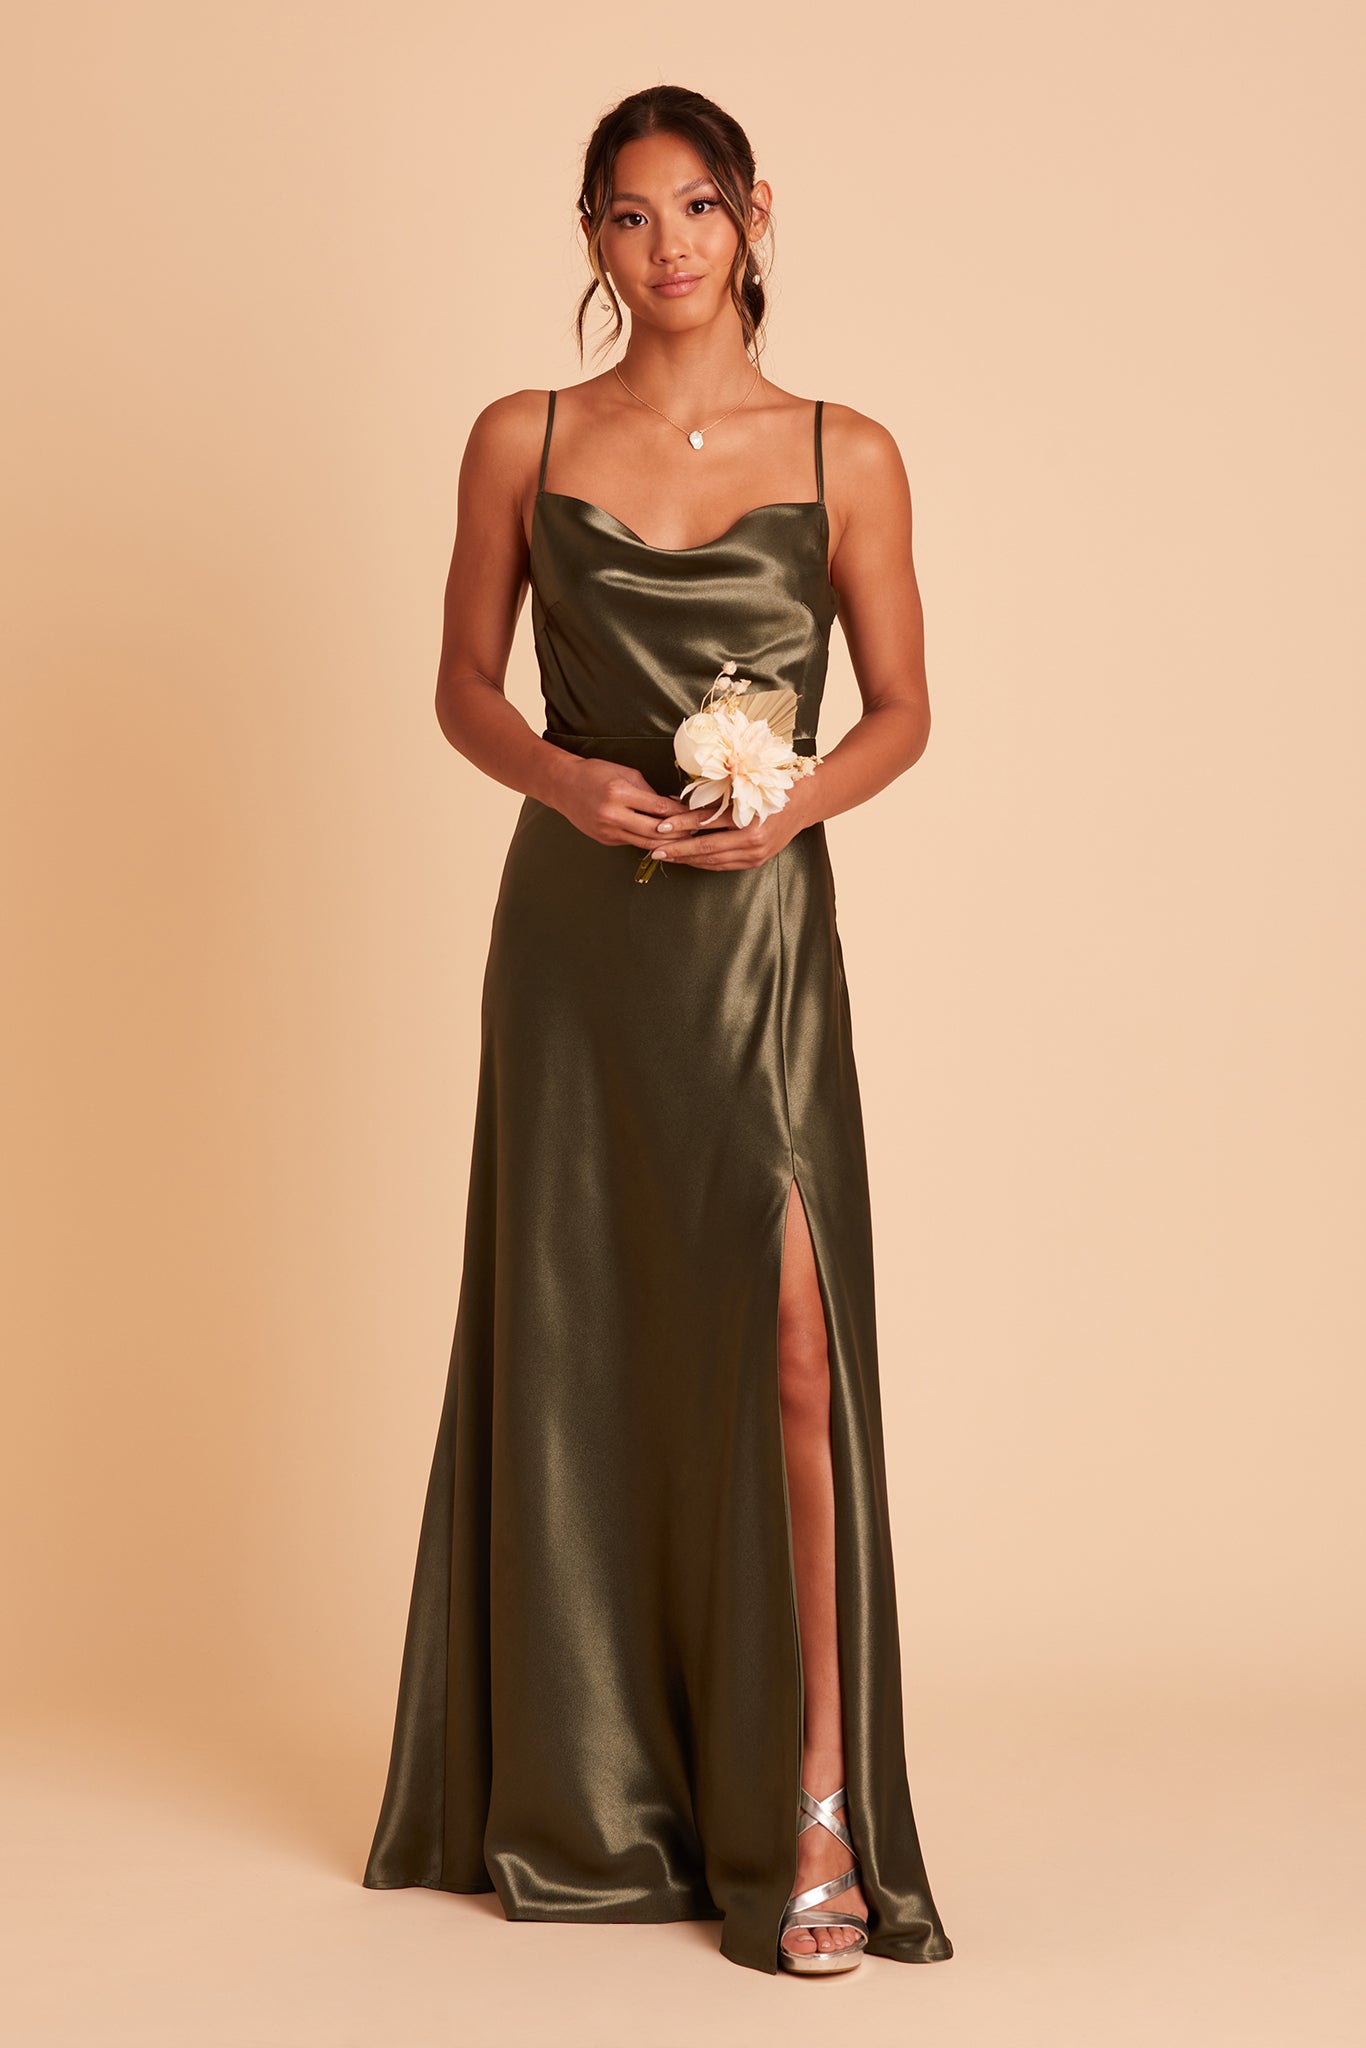 Front view of the Lisa Long Dress in olive satin shows a model revealing their leg and foot in the mid-thigh slit. They wear strappy high heel shoes in platinum metallic.